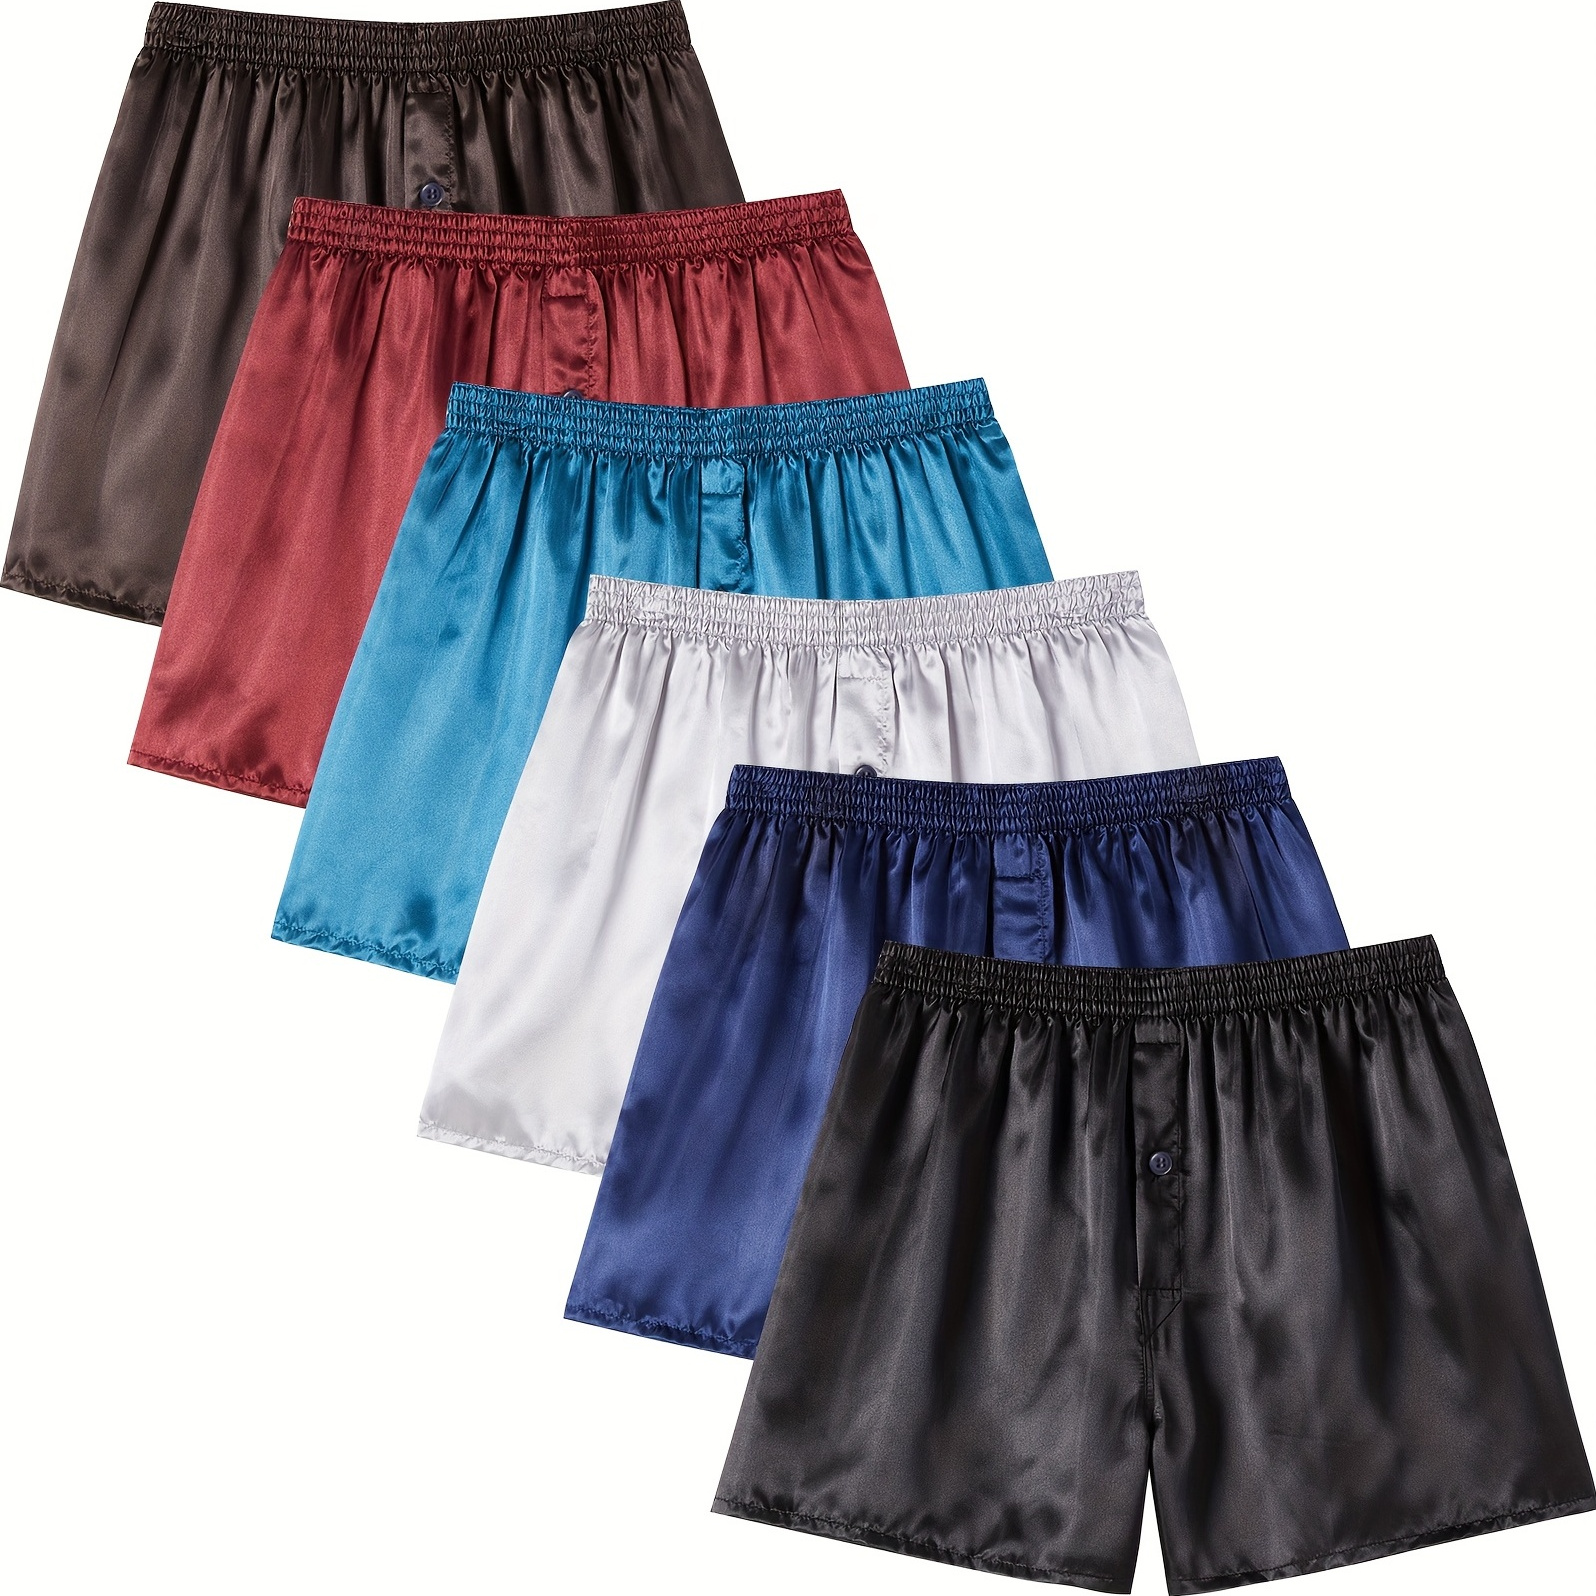 Silk Boxer Shorts for Women - Assorted 3-Pack - XS (25-27) - Silk Boxers  Set at  Women's Clothing store: Boy Shorts Panties